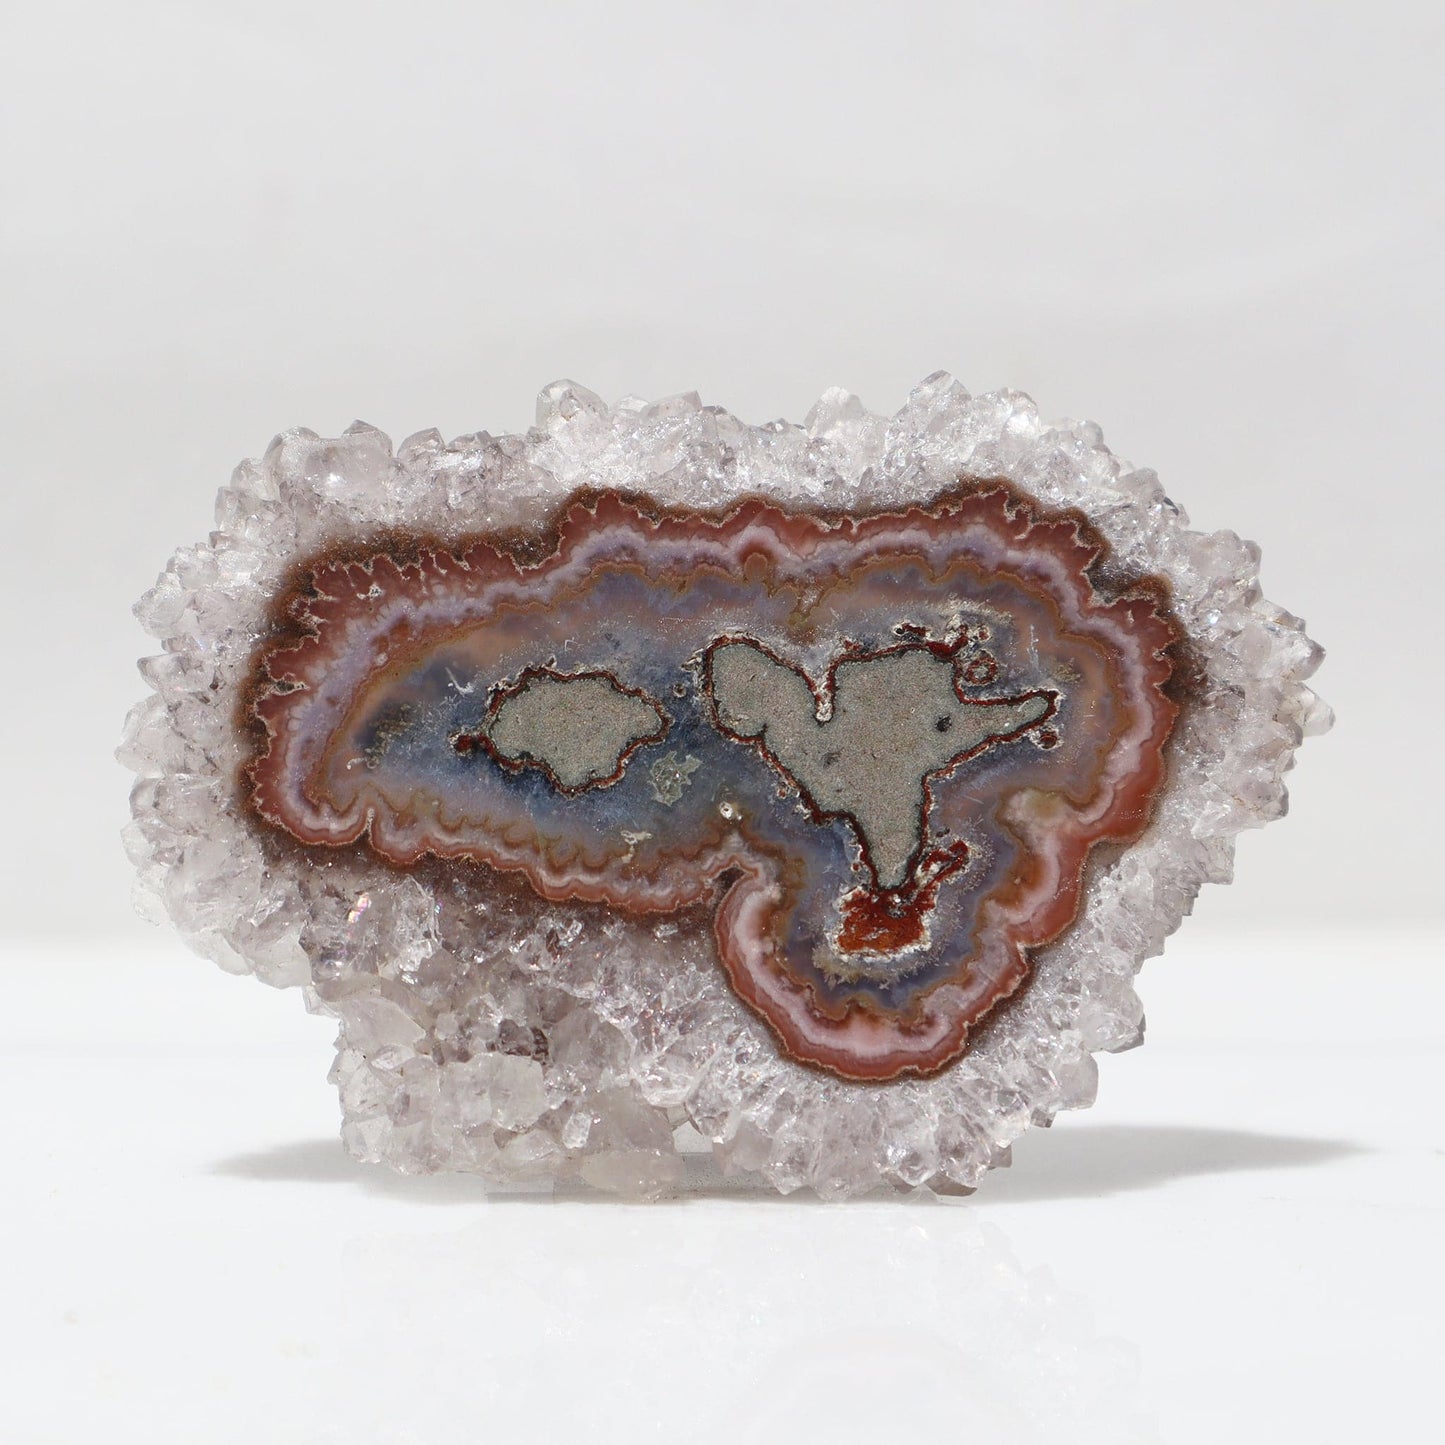 Undulating edge and amusing earthy tones amethyst stalactite slice. A sizable band of white quartz crystals frames the beautiful nature-made minerals design of blue and brown jasper. Also visible is a band of pink jasper and a hint of red hematite. 